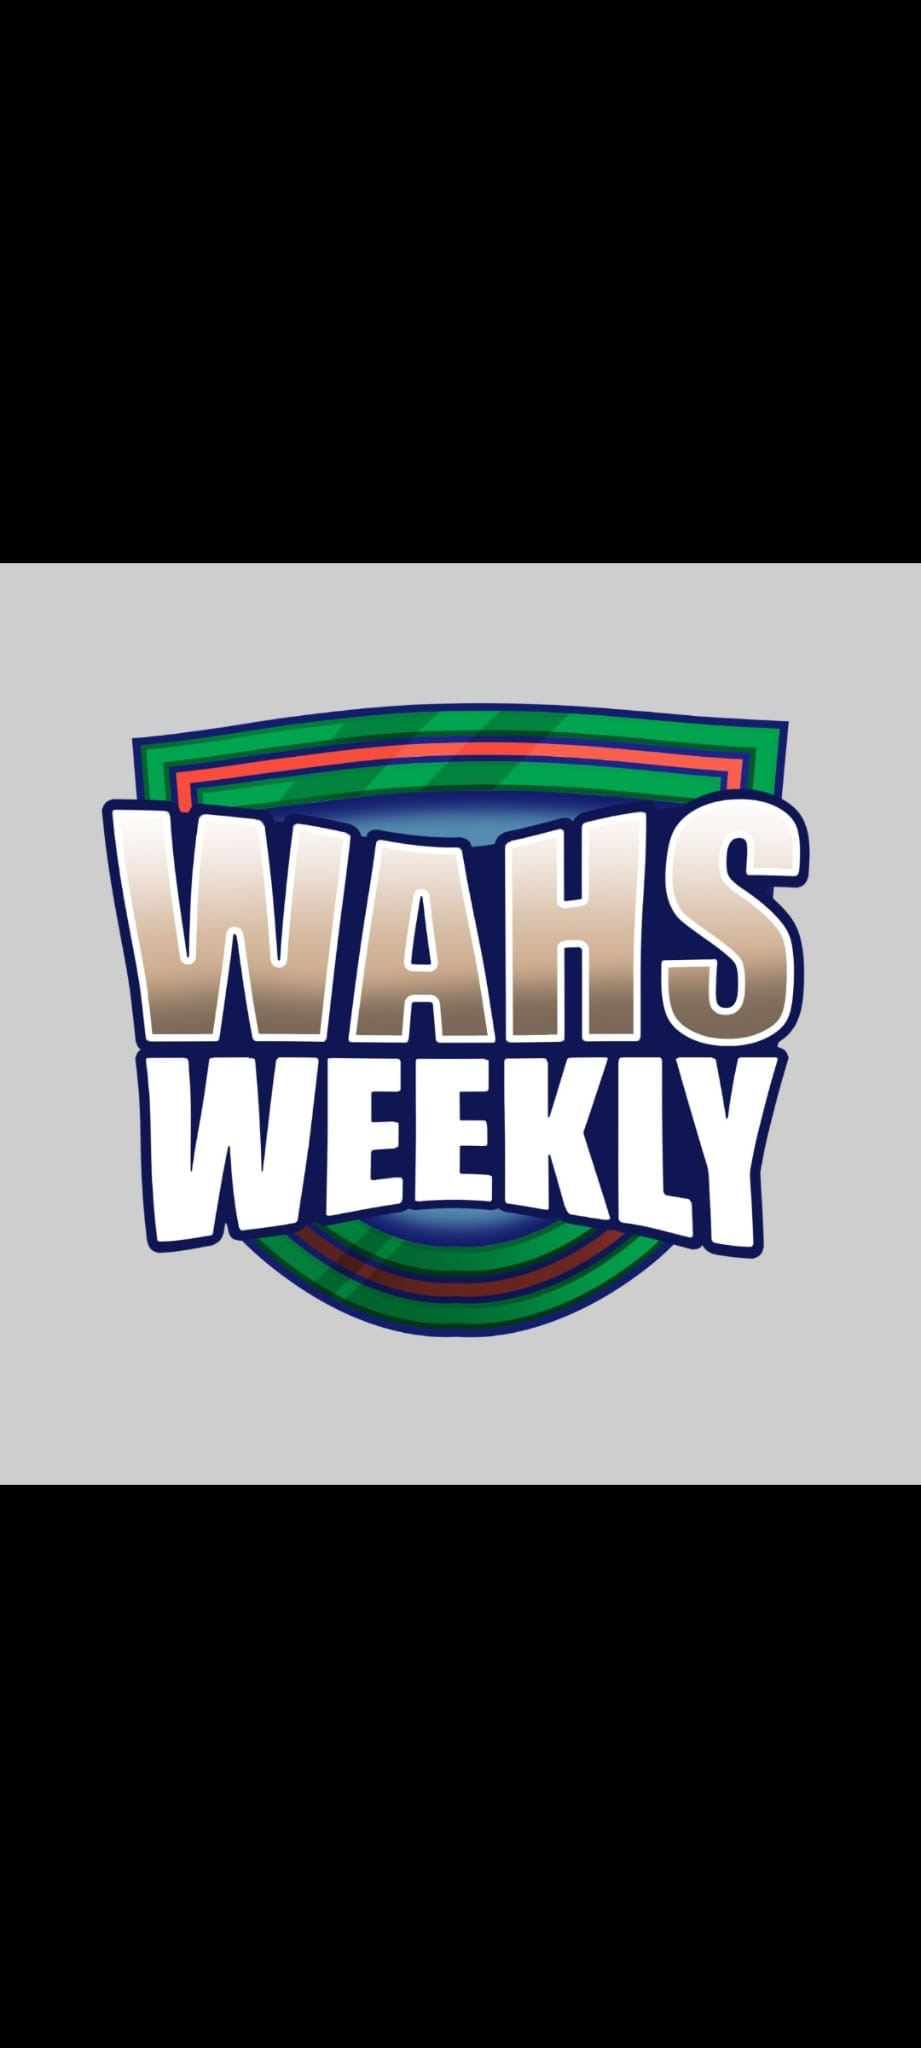 Wahs Weekly - The Pilot Episode (Talking League)